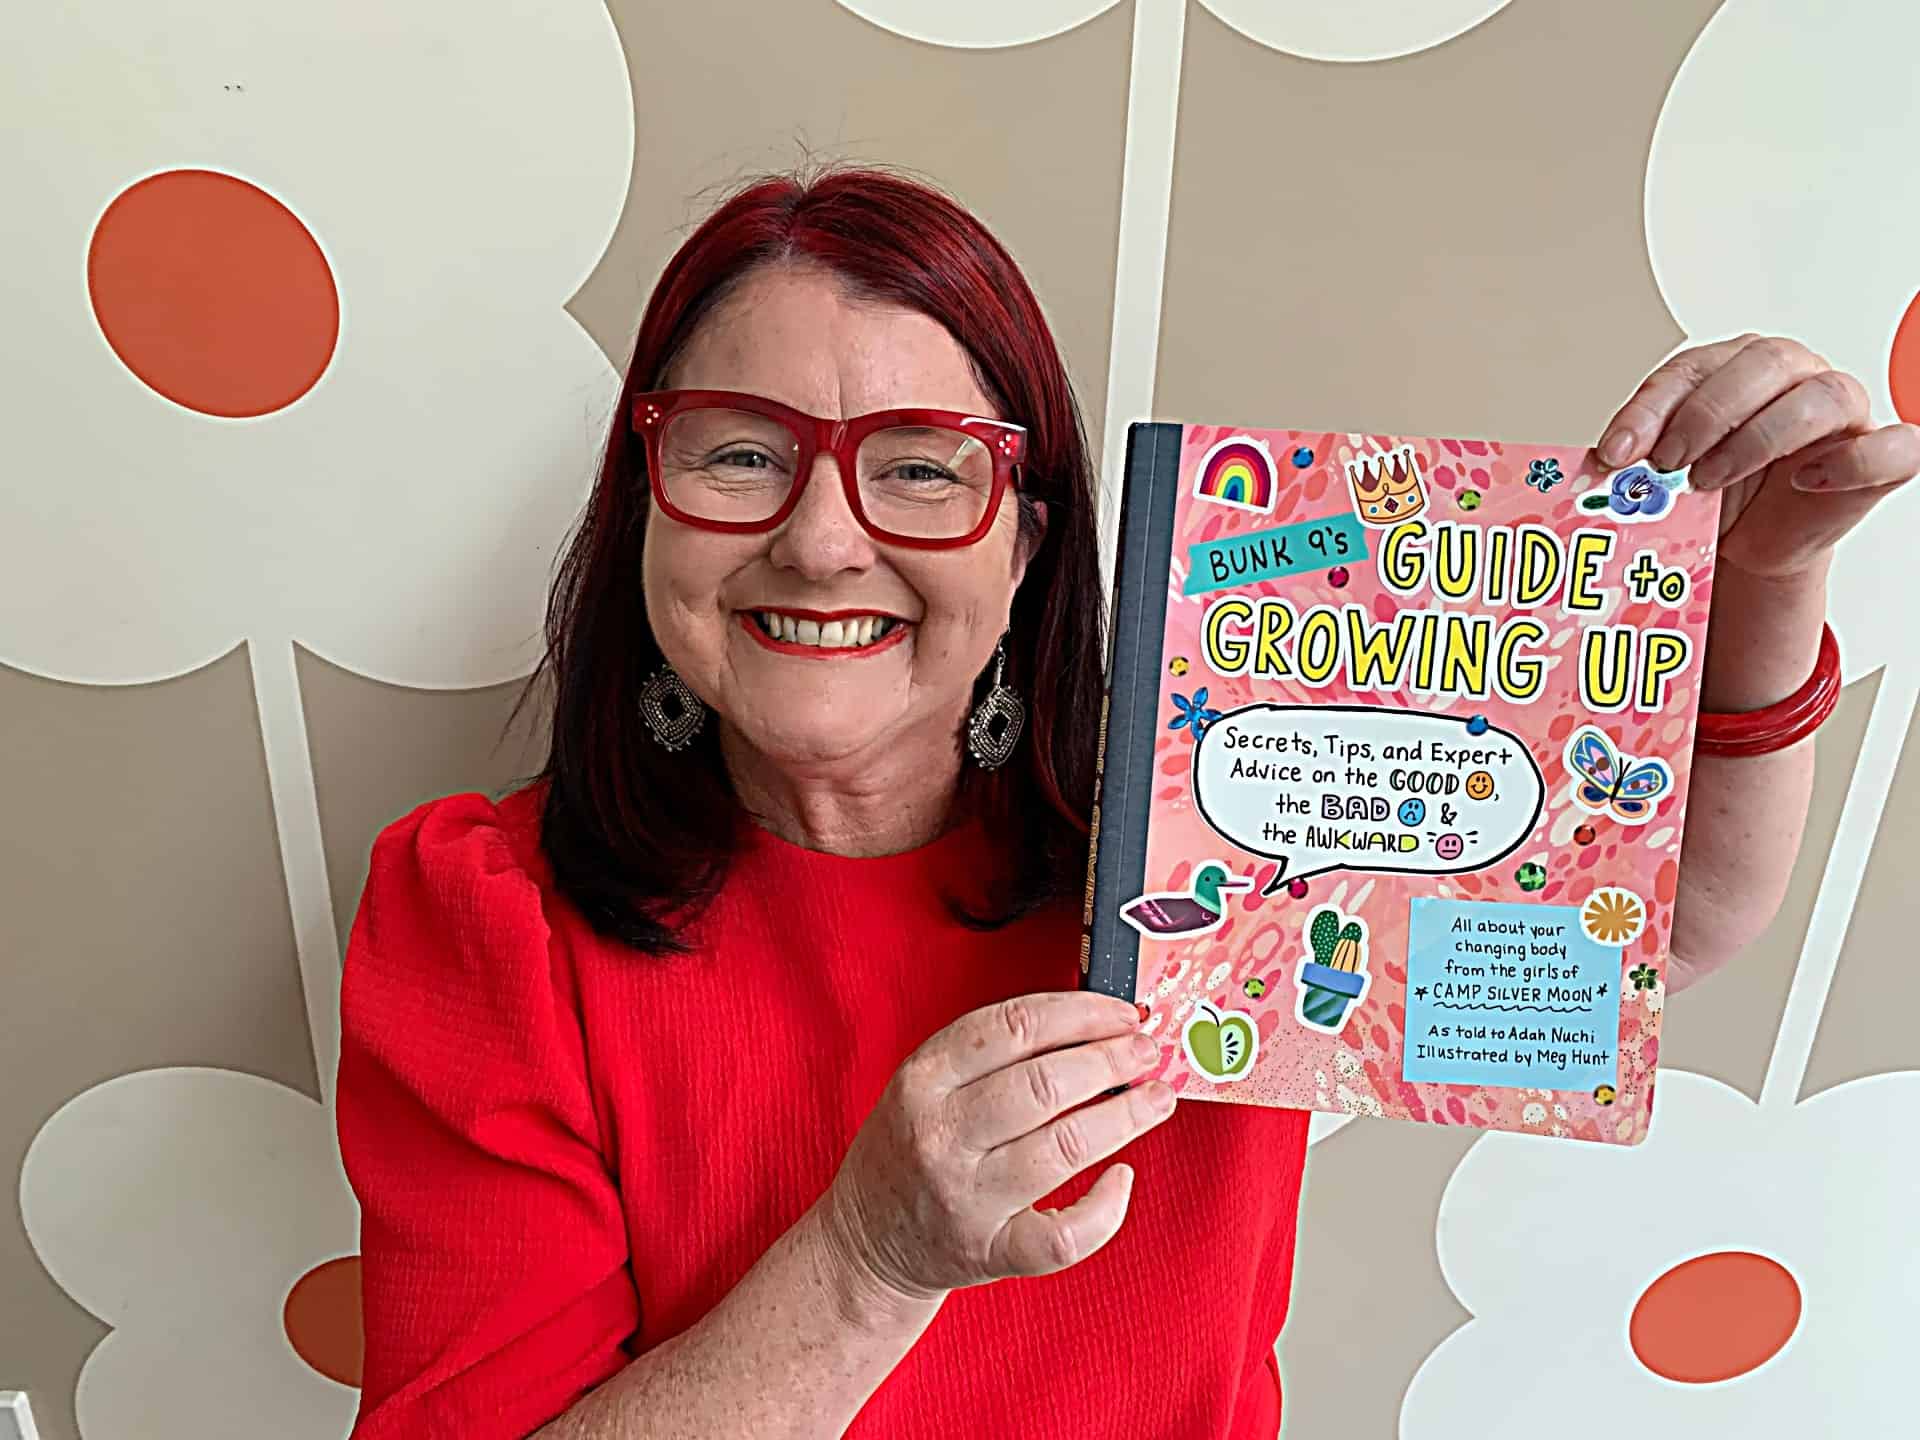 Bunk 9’s Guide to Growing Up - Book review by Rowena Thomas | 'Amazing Me'